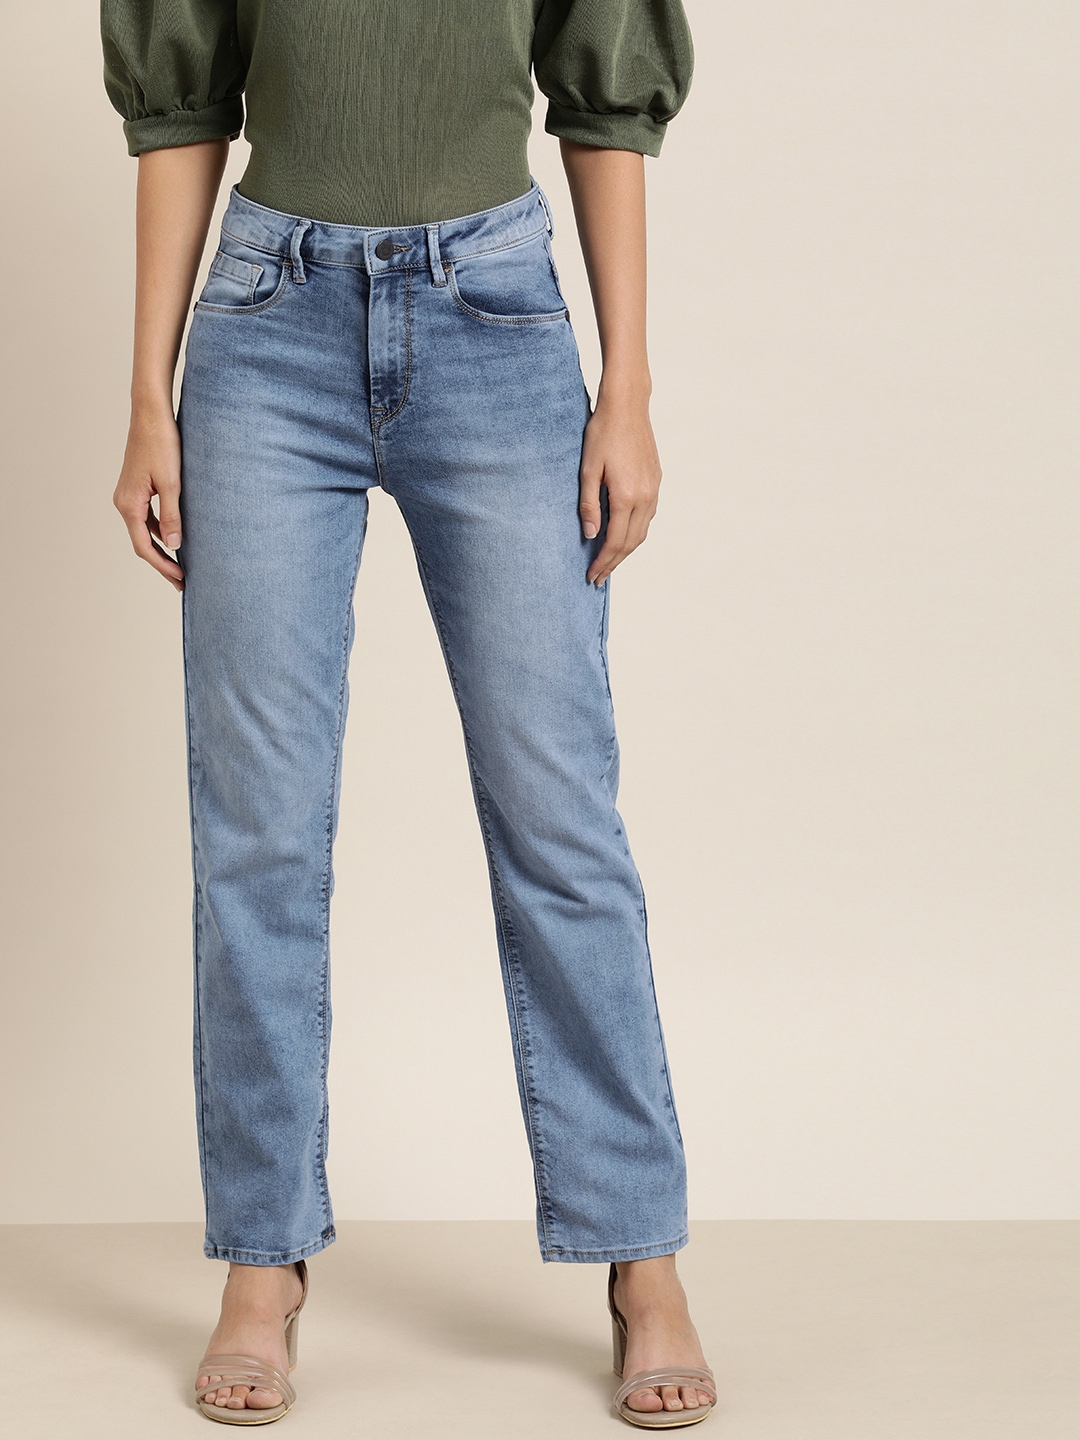 Details more than 114 straight fit jeans women best